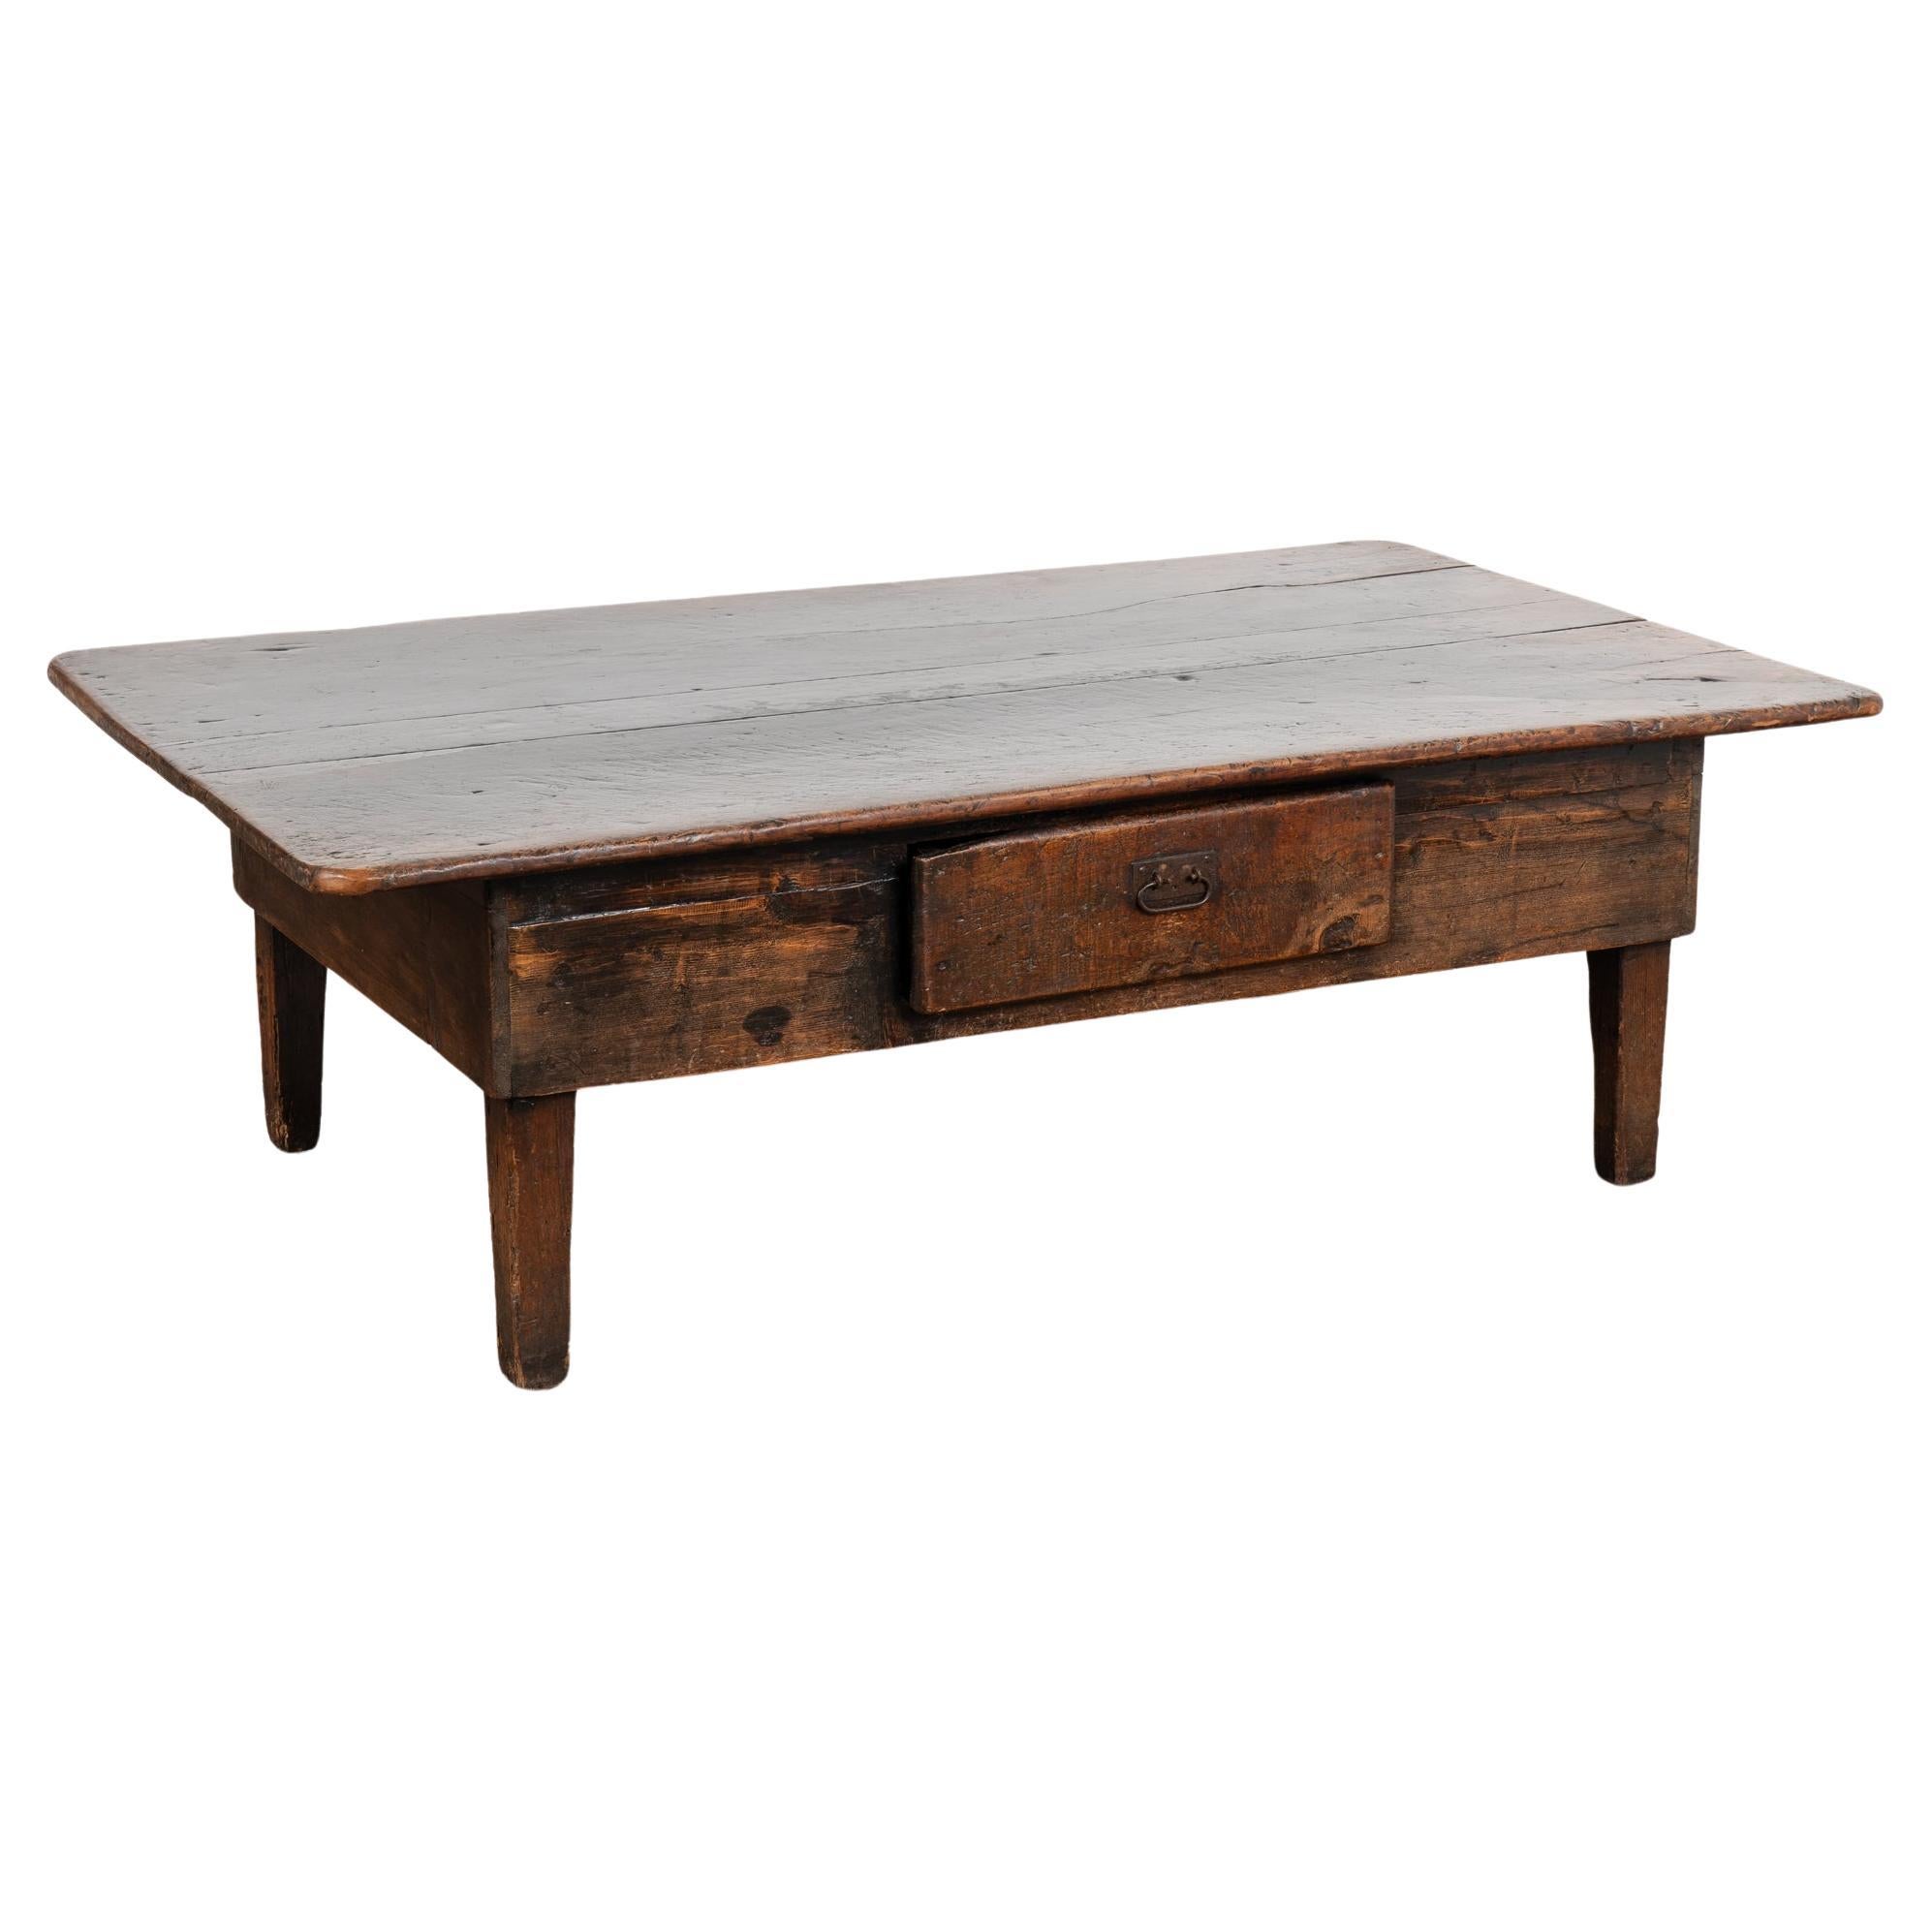 French Country Coffee Table With Single Drawer, Circa 1800-40